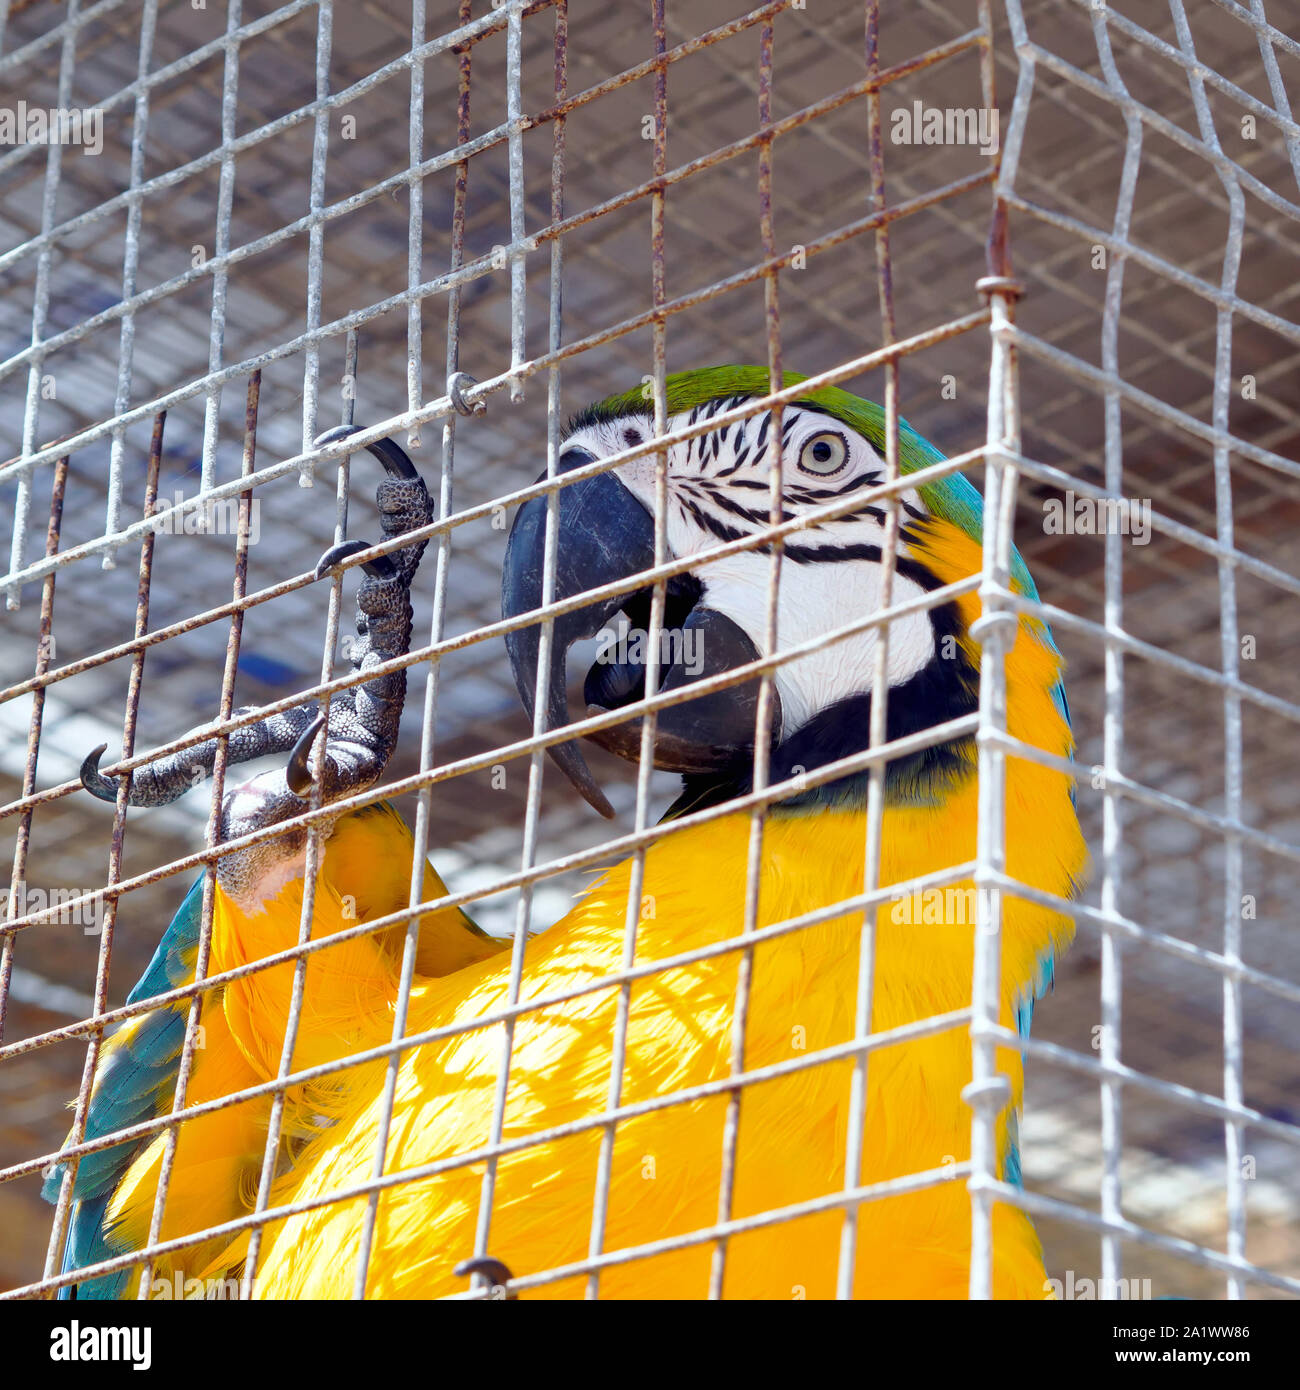 Close up of a caged Blue and yellow Macaw, Ara ararauna, at the South Texas Botanical Gardens & Nature Center in Corpus Christi, Texas USA. Stock Photo